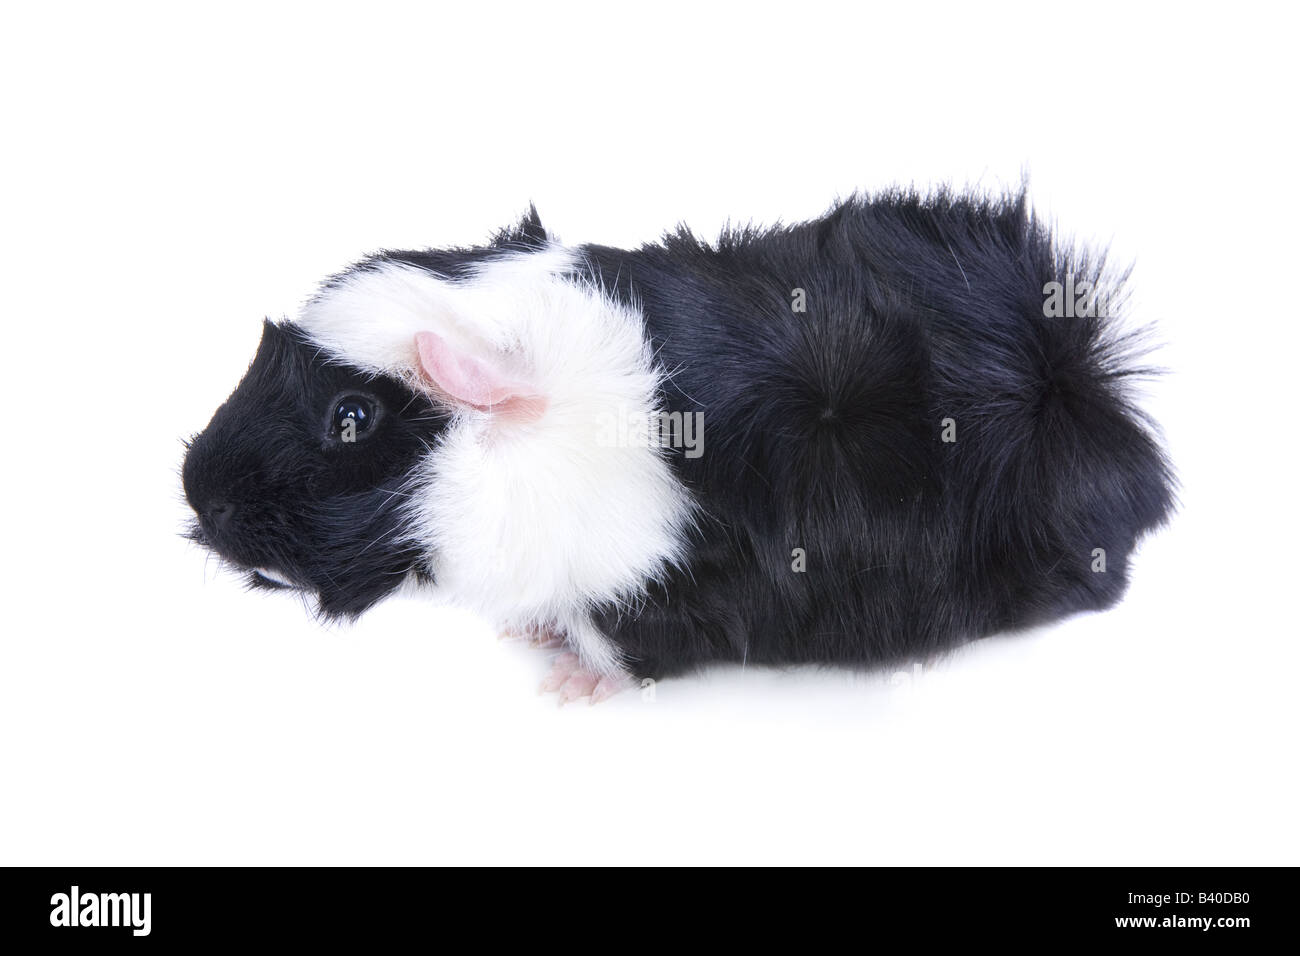 Cute Black and white Abyssinian Guinea pig or Cavy isolated on white background Stock Photo